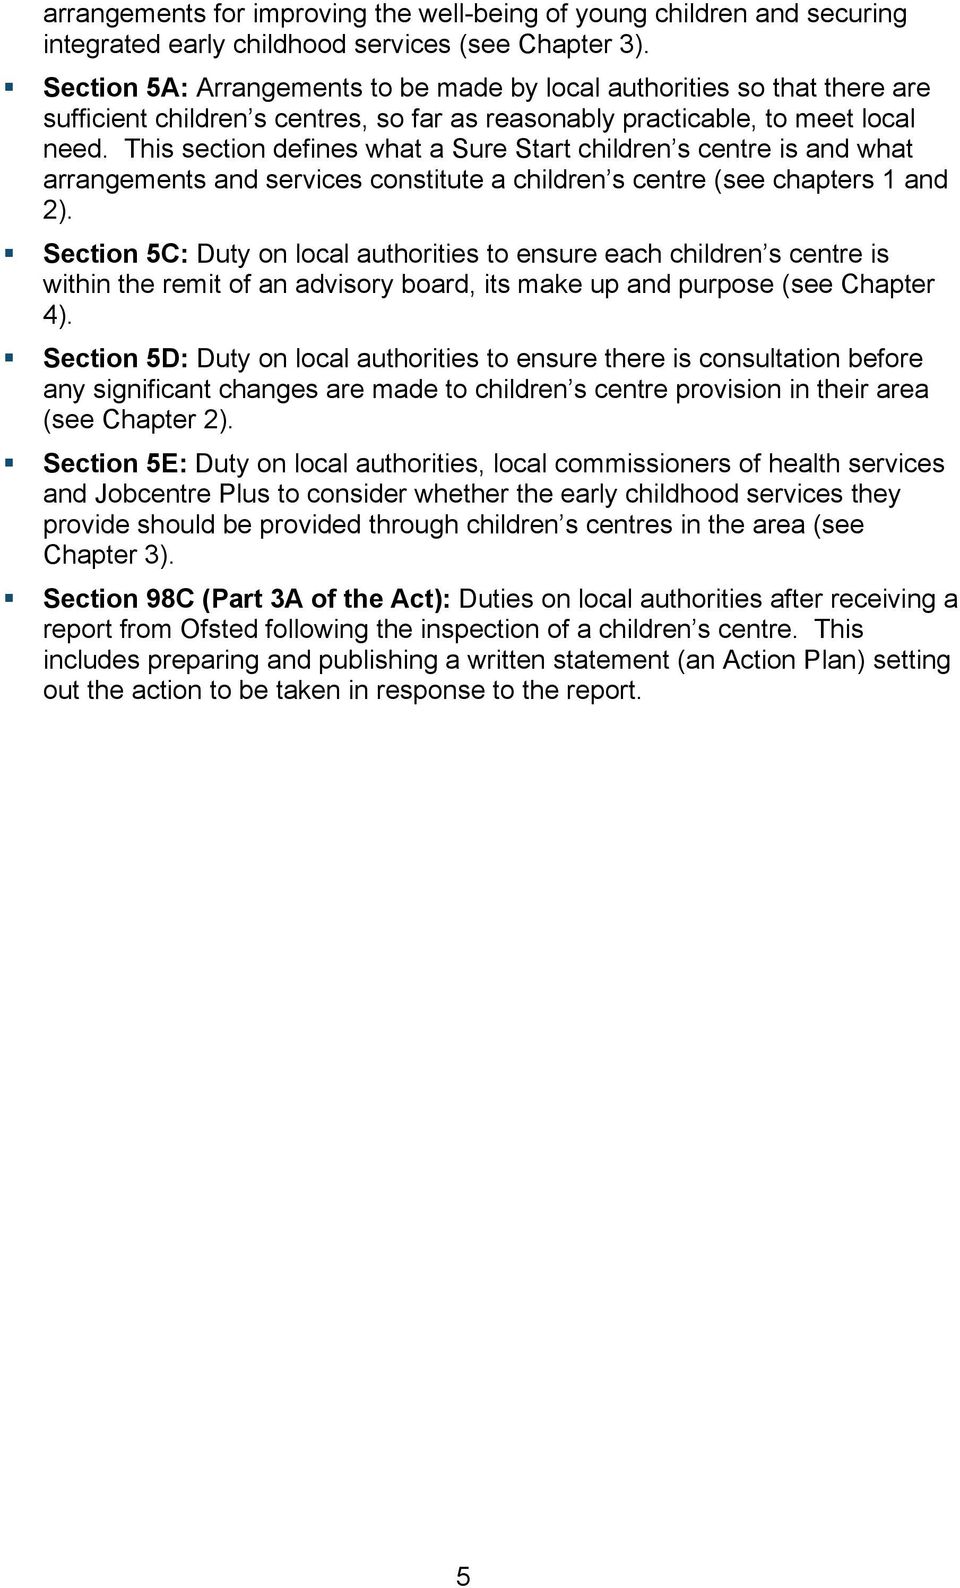 This section defines what a Sure Start children s centre is and what arrangements and services constitute a children s centre (see chapters 1 and 2).